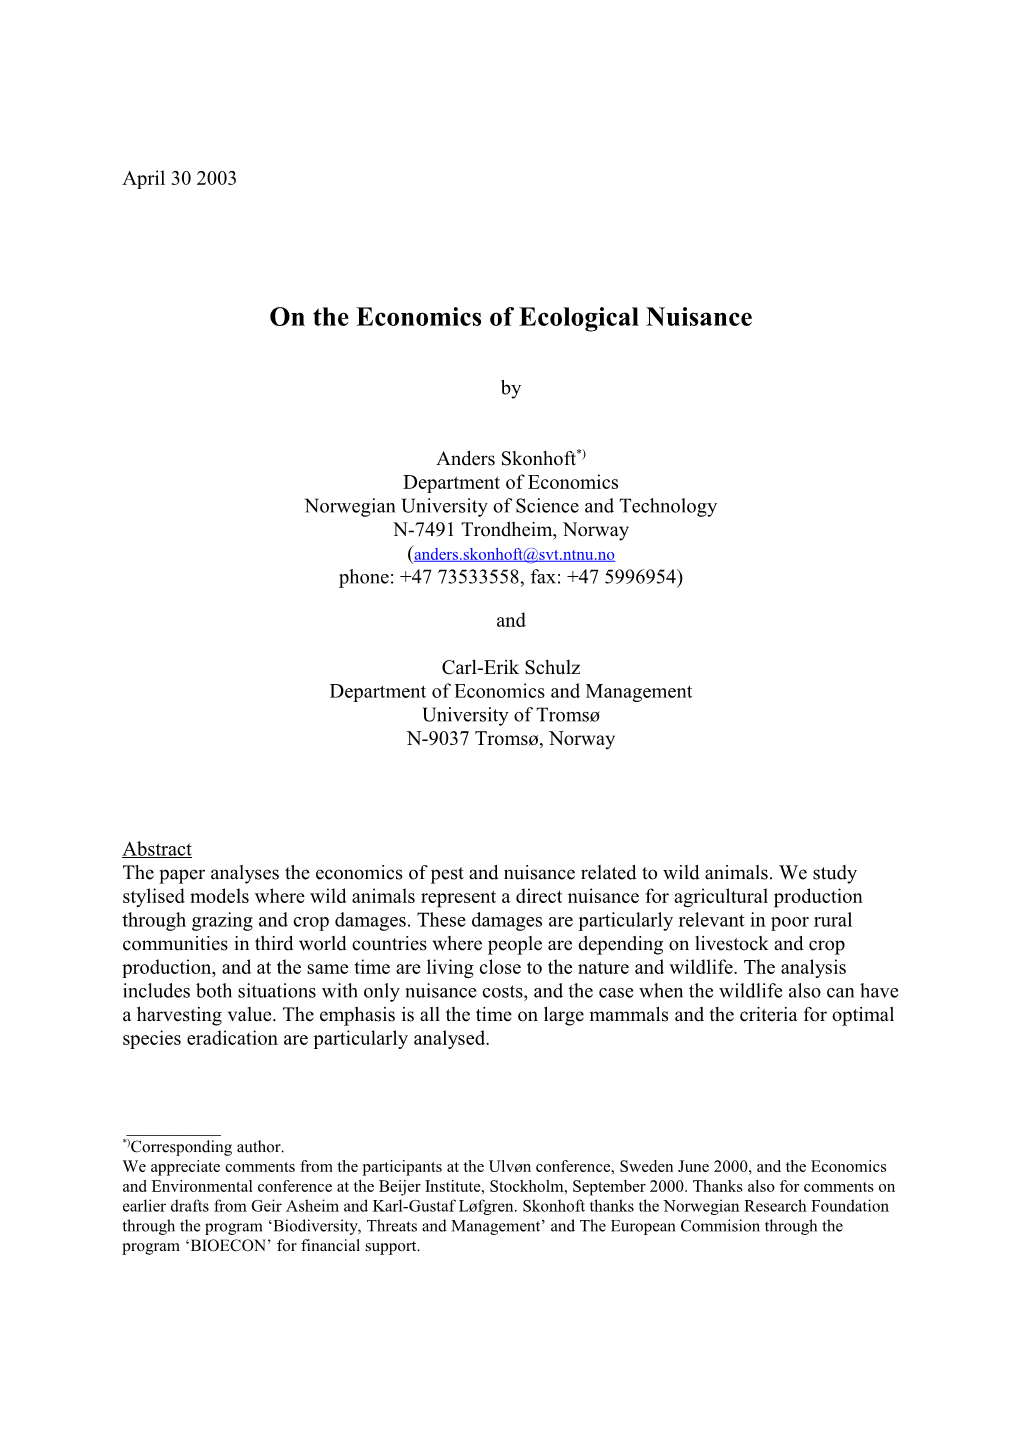 On the Economics of Ecological Nuisance